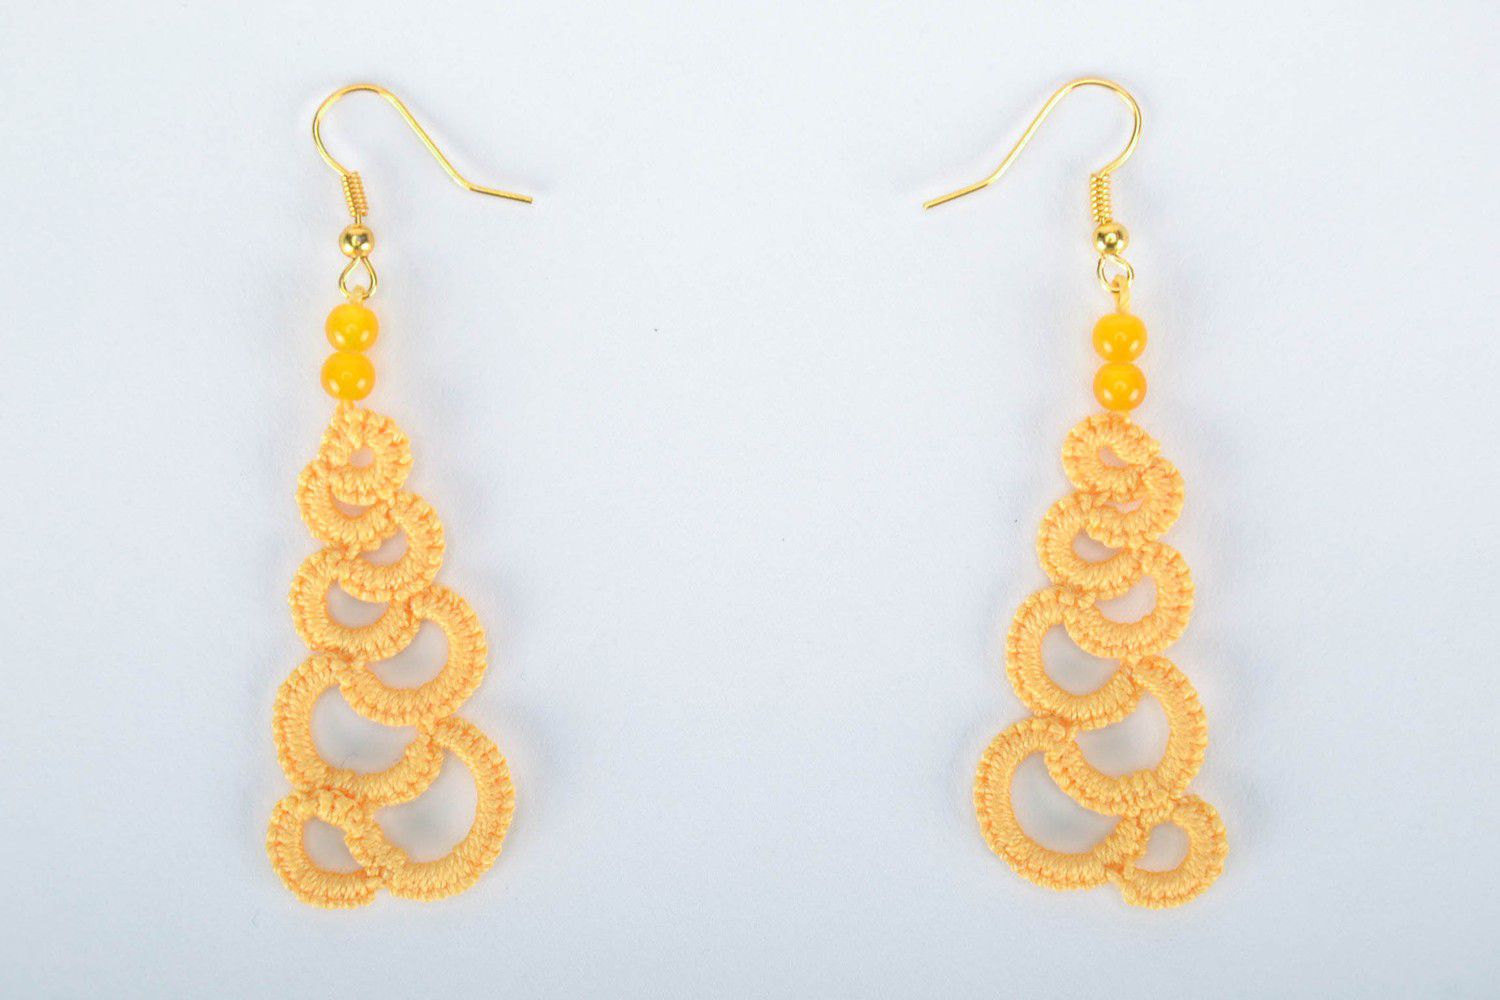 Orange earrings made from woven lace photo 3